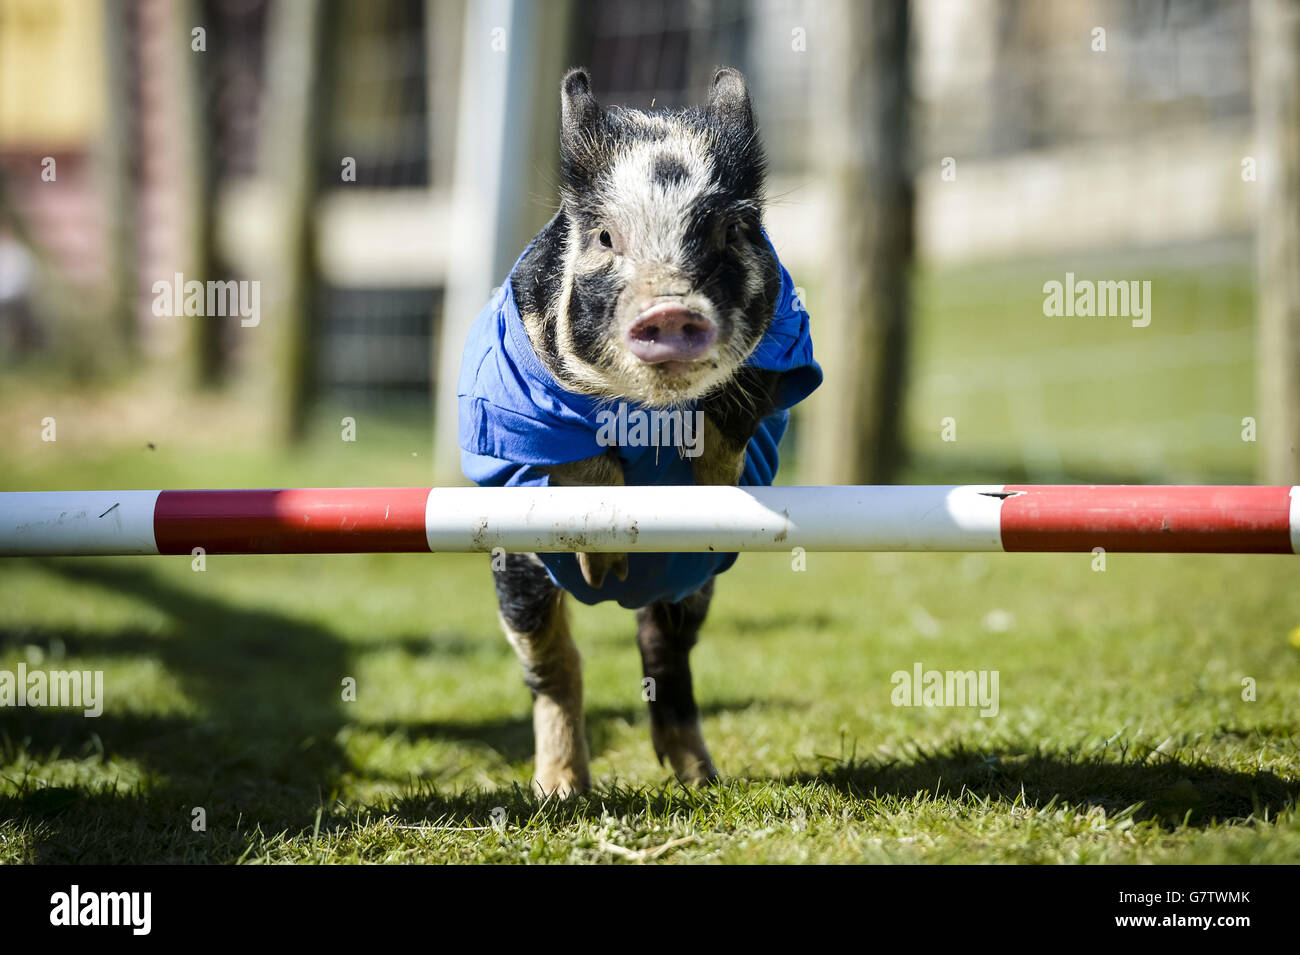 Conservative Party pig David Hameron jumps a fence on his lap of honour after romping home to win the 2015 Pennywell Bacon Stakes Steeplechase special General Election pig race, defeating rivals Ed Swiliband for the Labour Party, Pork Clegg for the Liberal Democrats, Nigel Forage for Ukip and Pork Scratchings representing all other political parties. Stock Photo